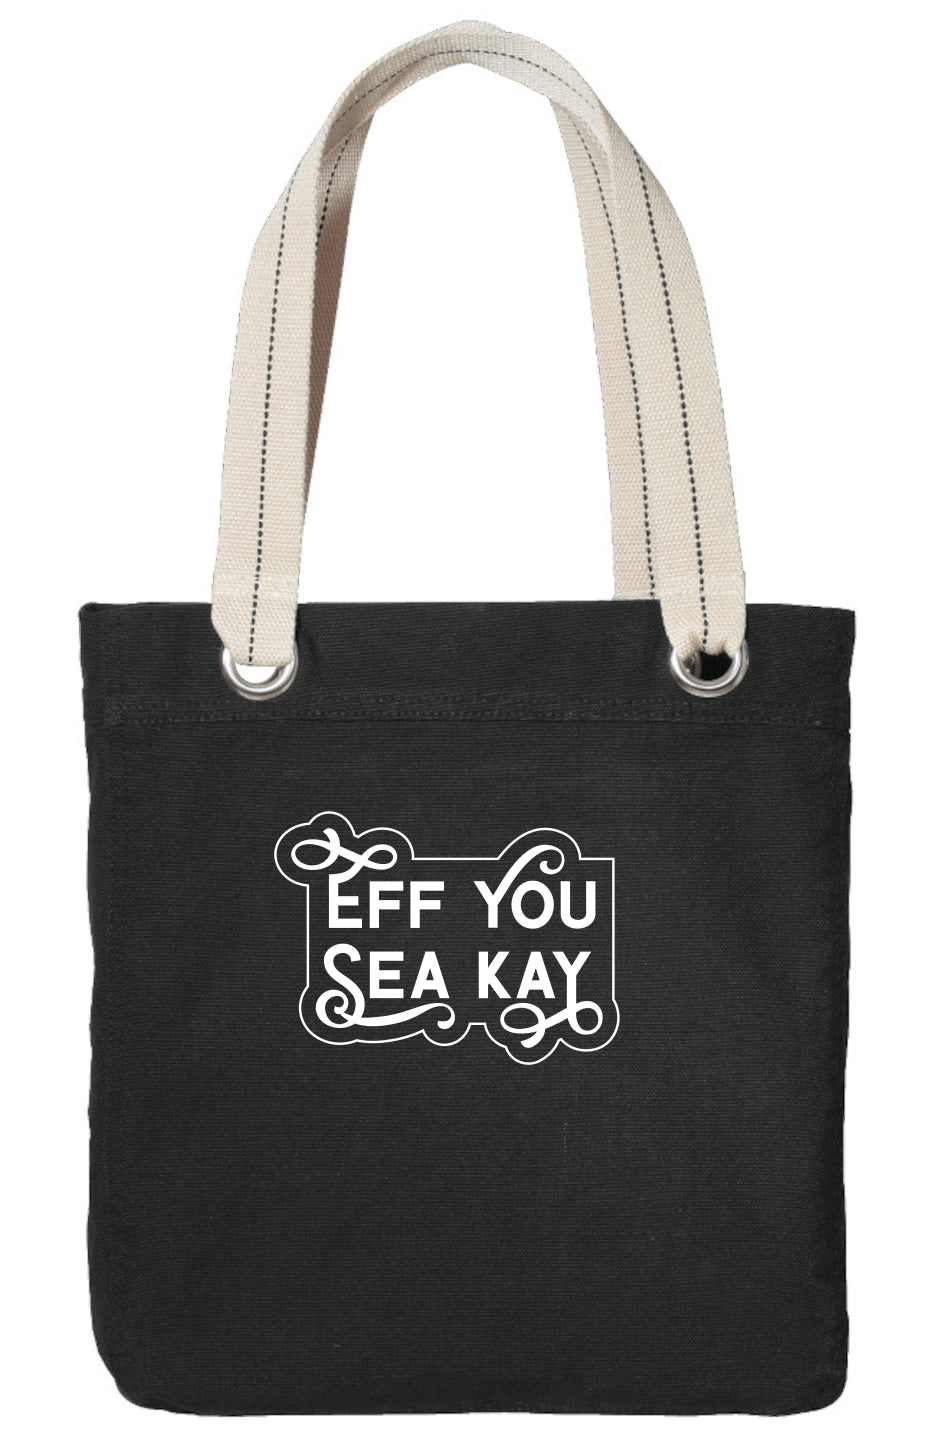 Image of tote in black with silver-toned grommets and a woven canvas strap with a dotted black line through the center. The front of the bag as "Eff You Sea Kay" in a decorative font with 4 letters having swashes and an outline of the shape.